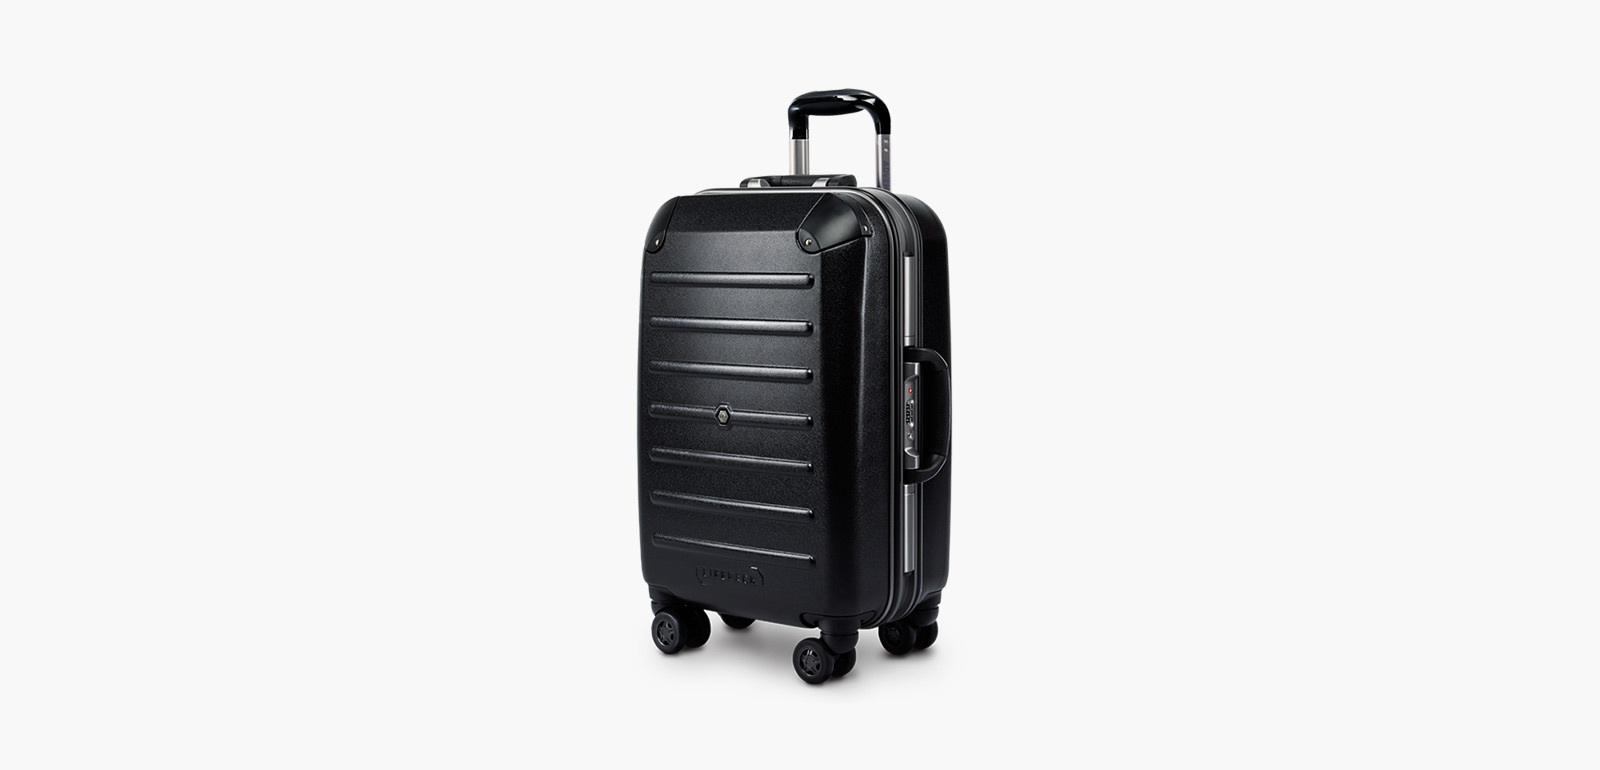 Lifepack Carry-On Closet Suitcase